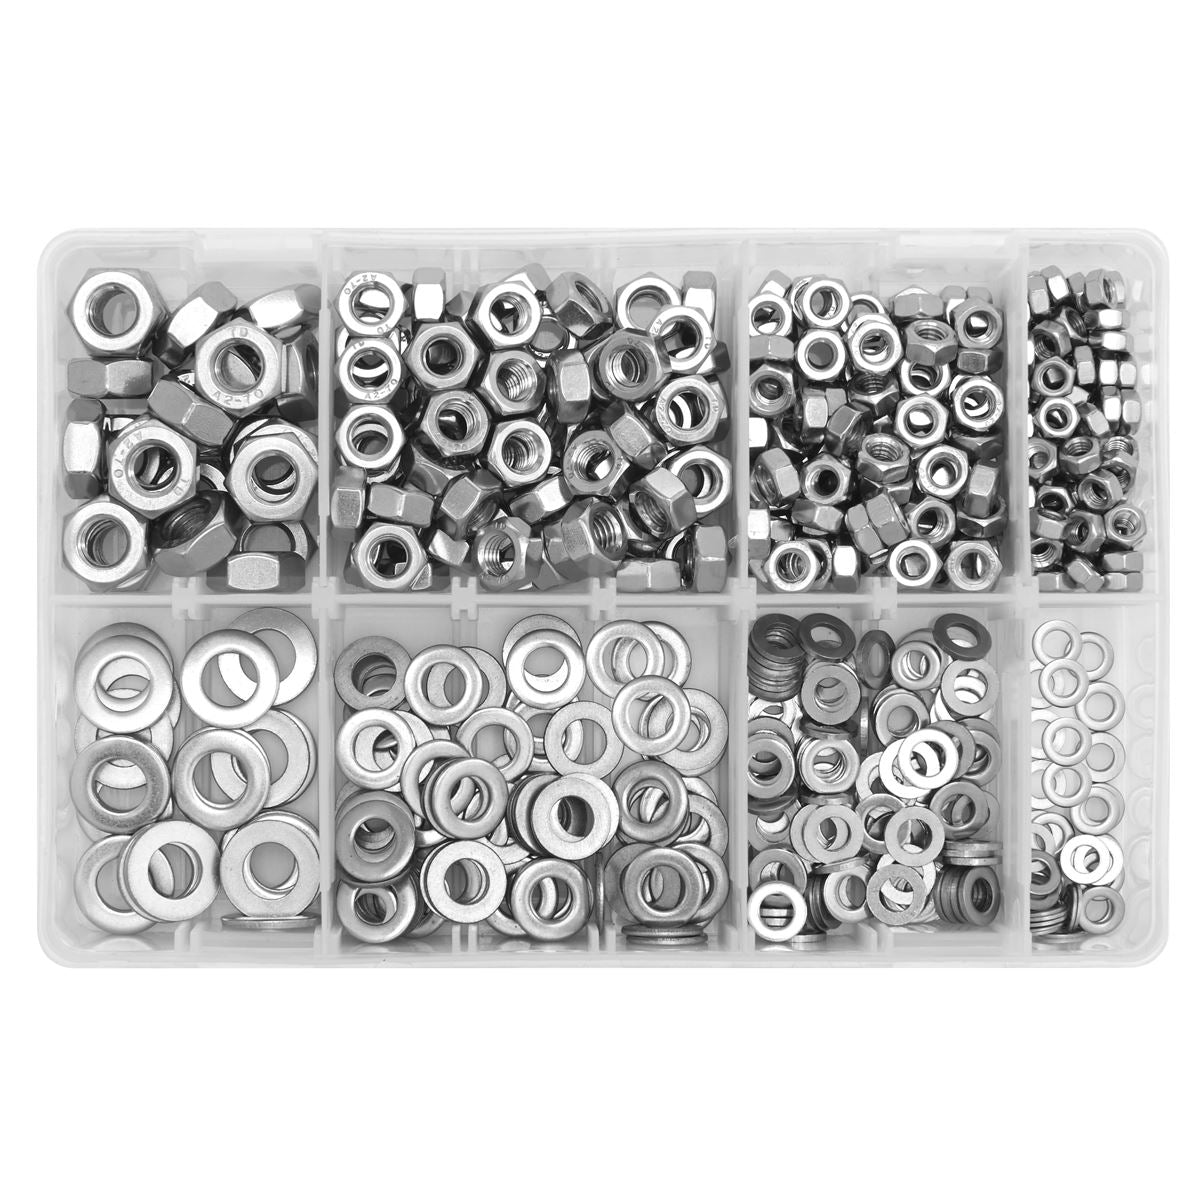 Sealey Stainless Steel Nut and Washer Assortment 500pc M5-M10